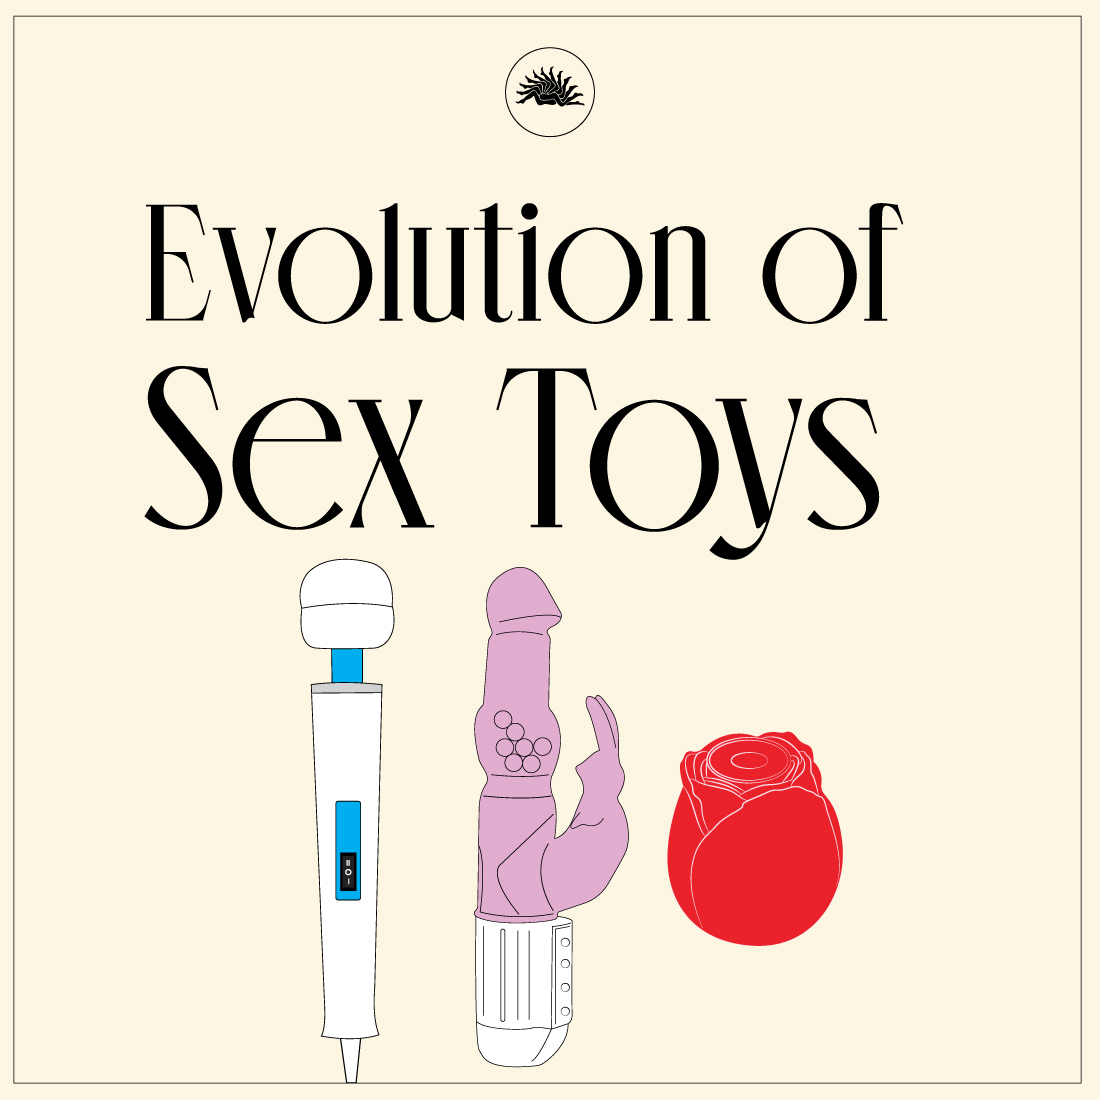 Graphic with "Evolution of Sex Toys" and Magic Wand Original, Rabbit Habit and InBloom Rosales illustrations